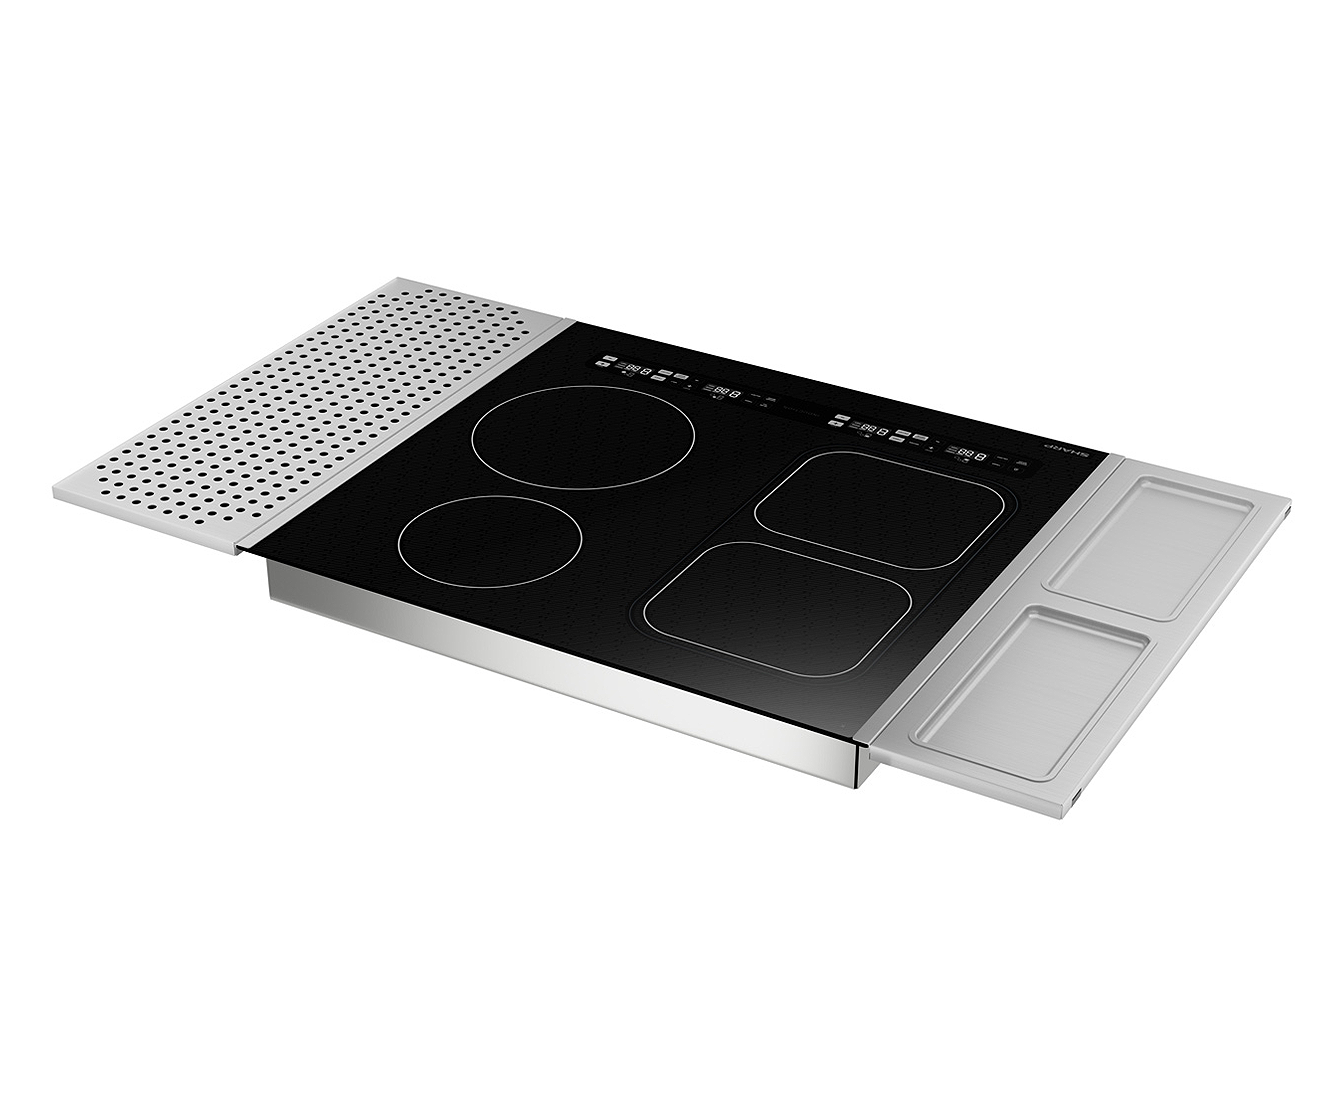 Sharp - 24 inch wide Induction Cooktop in Black - SCH2443GB